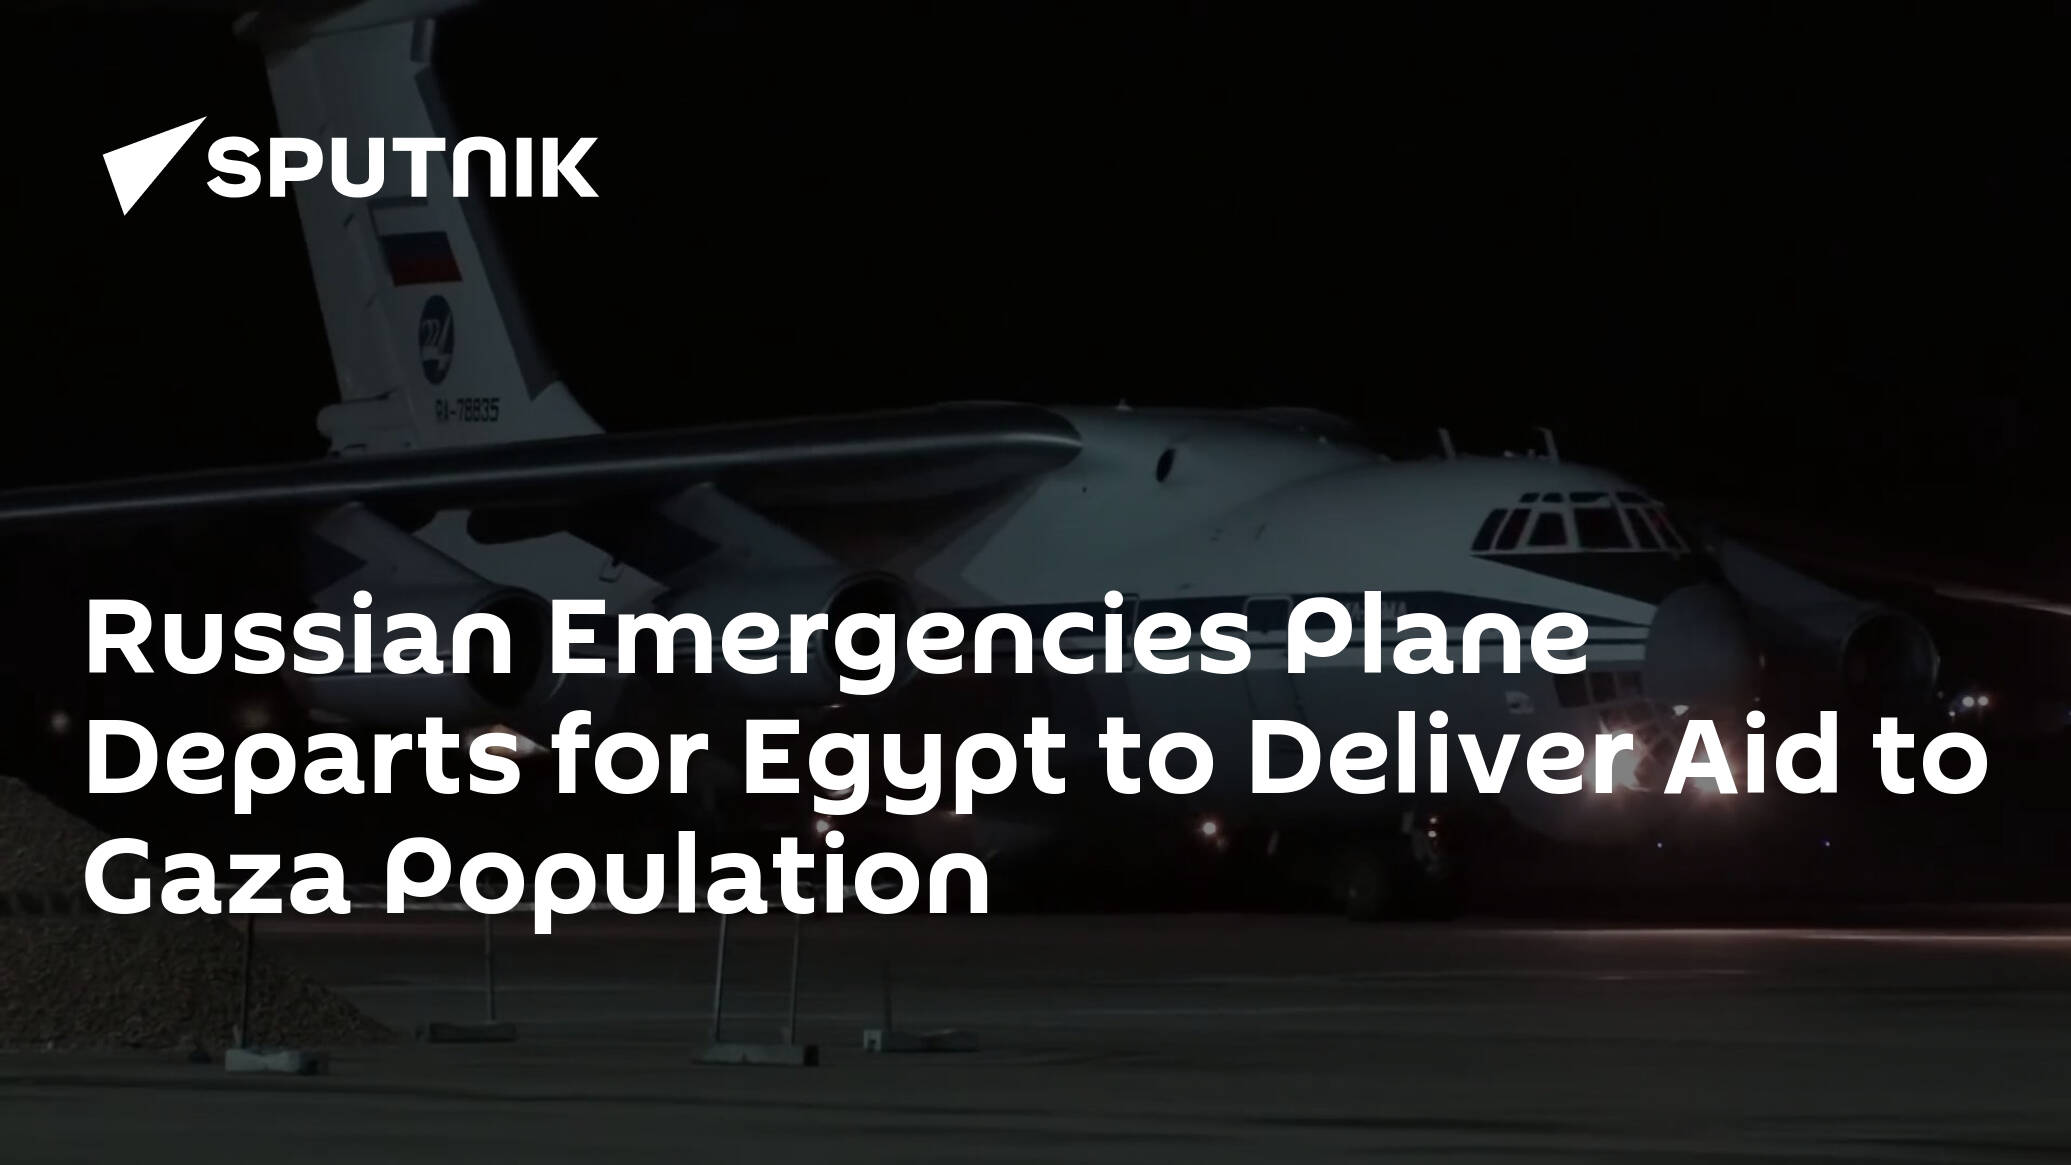 Russian Emergencies Plane Departs for Egypt to Deliver Aid to Gaza Population